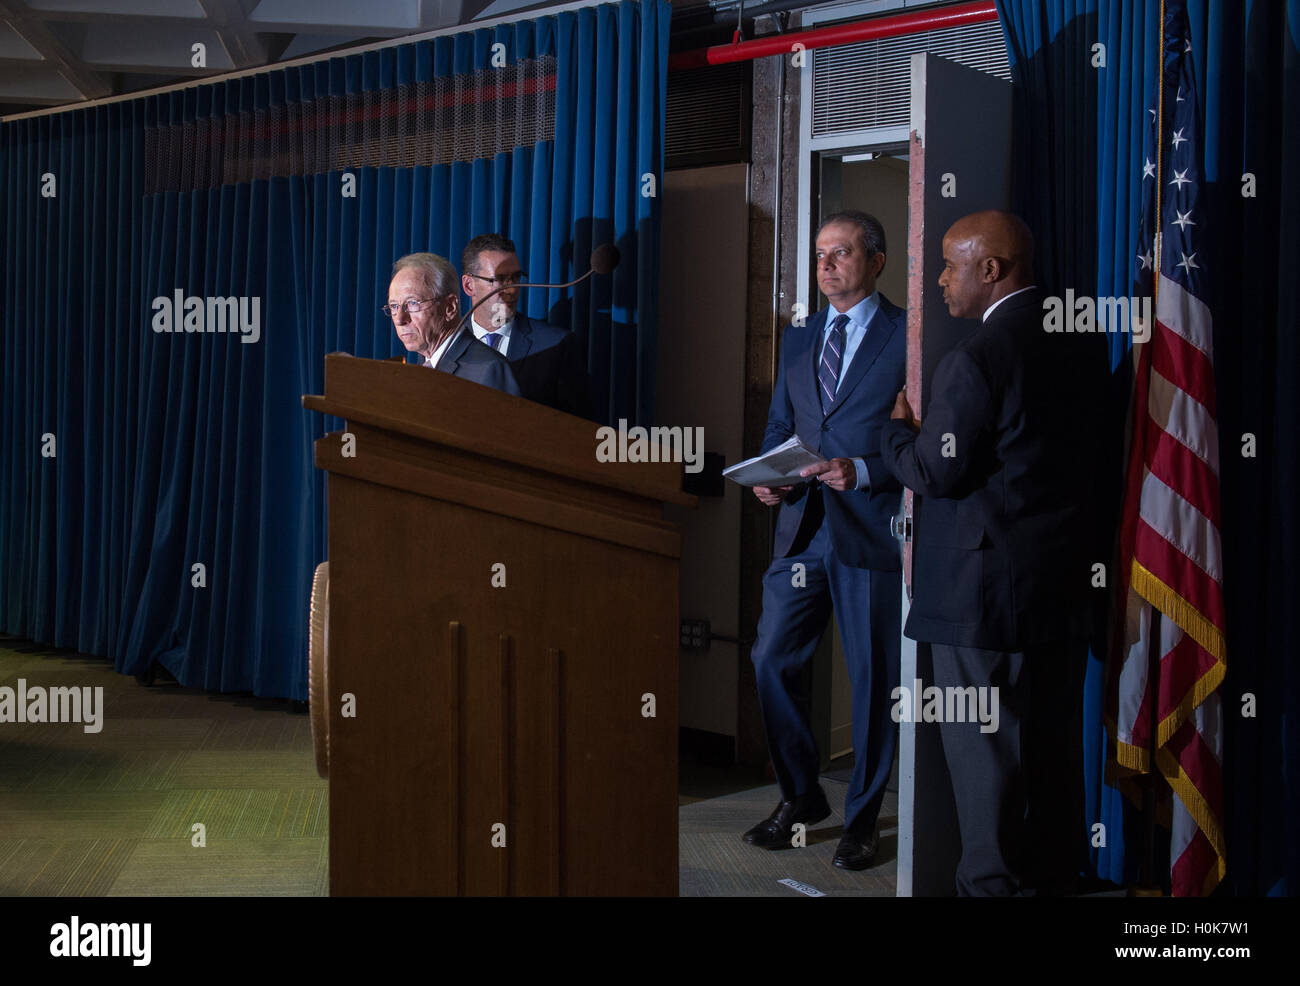 New York, NY, USA. 21st Sep, 2016. PREET BHARARA, U.S. Attorney General for the Southern District of New York, arrives to announce criminal civil rights and obstruction charges against five New York State correction officers involved in a November 2013 beating of an inmate at the Downstate Correctional Facility in Fishkill, New York. © Bryan Smith/ZUMA Wire/Alamy Live News Stock Photo